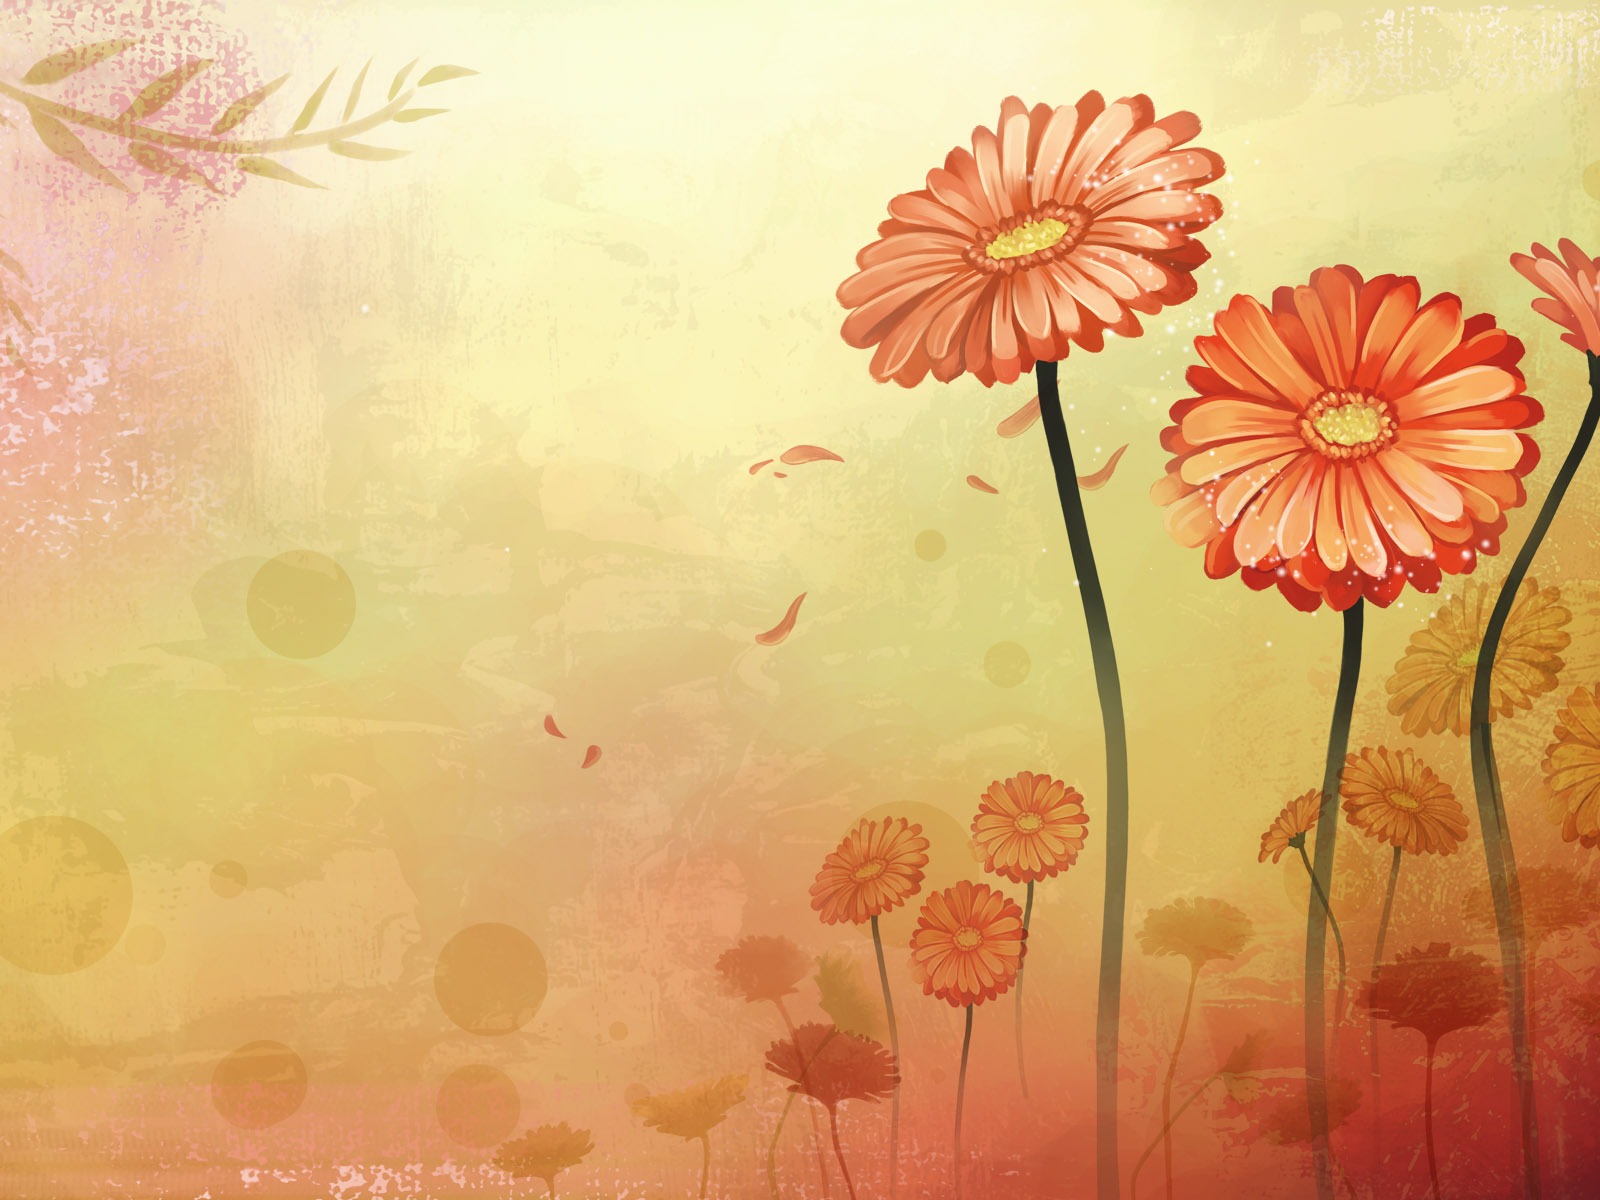 Synthetic Wallpaper Colorful Flower #28 - 1600x1200